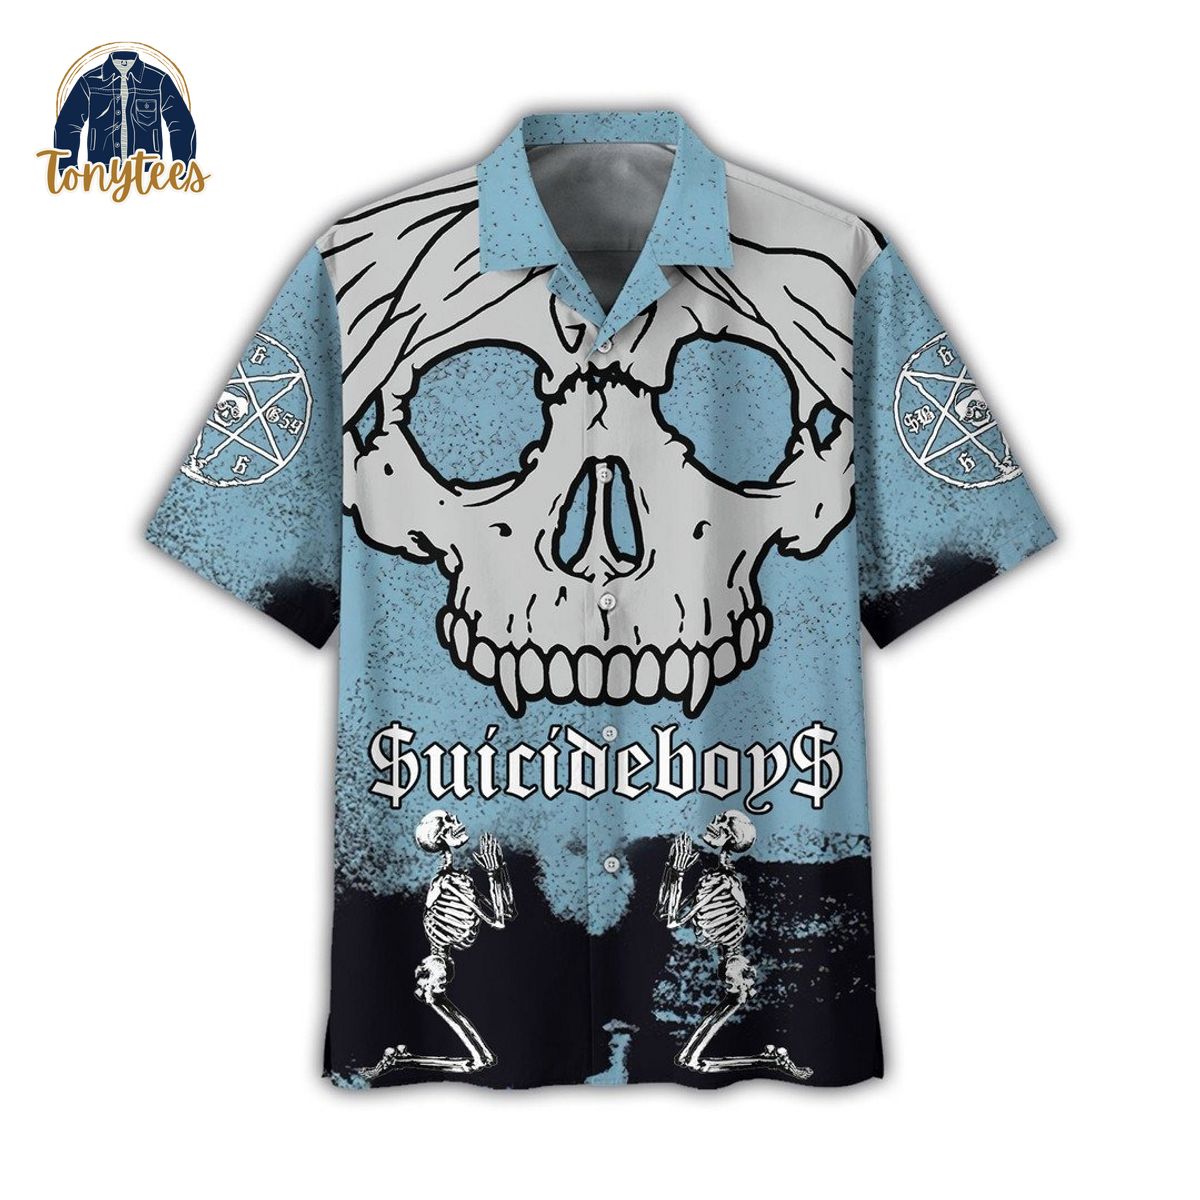 Suicideboys live fast die whenever hawaiian shirt